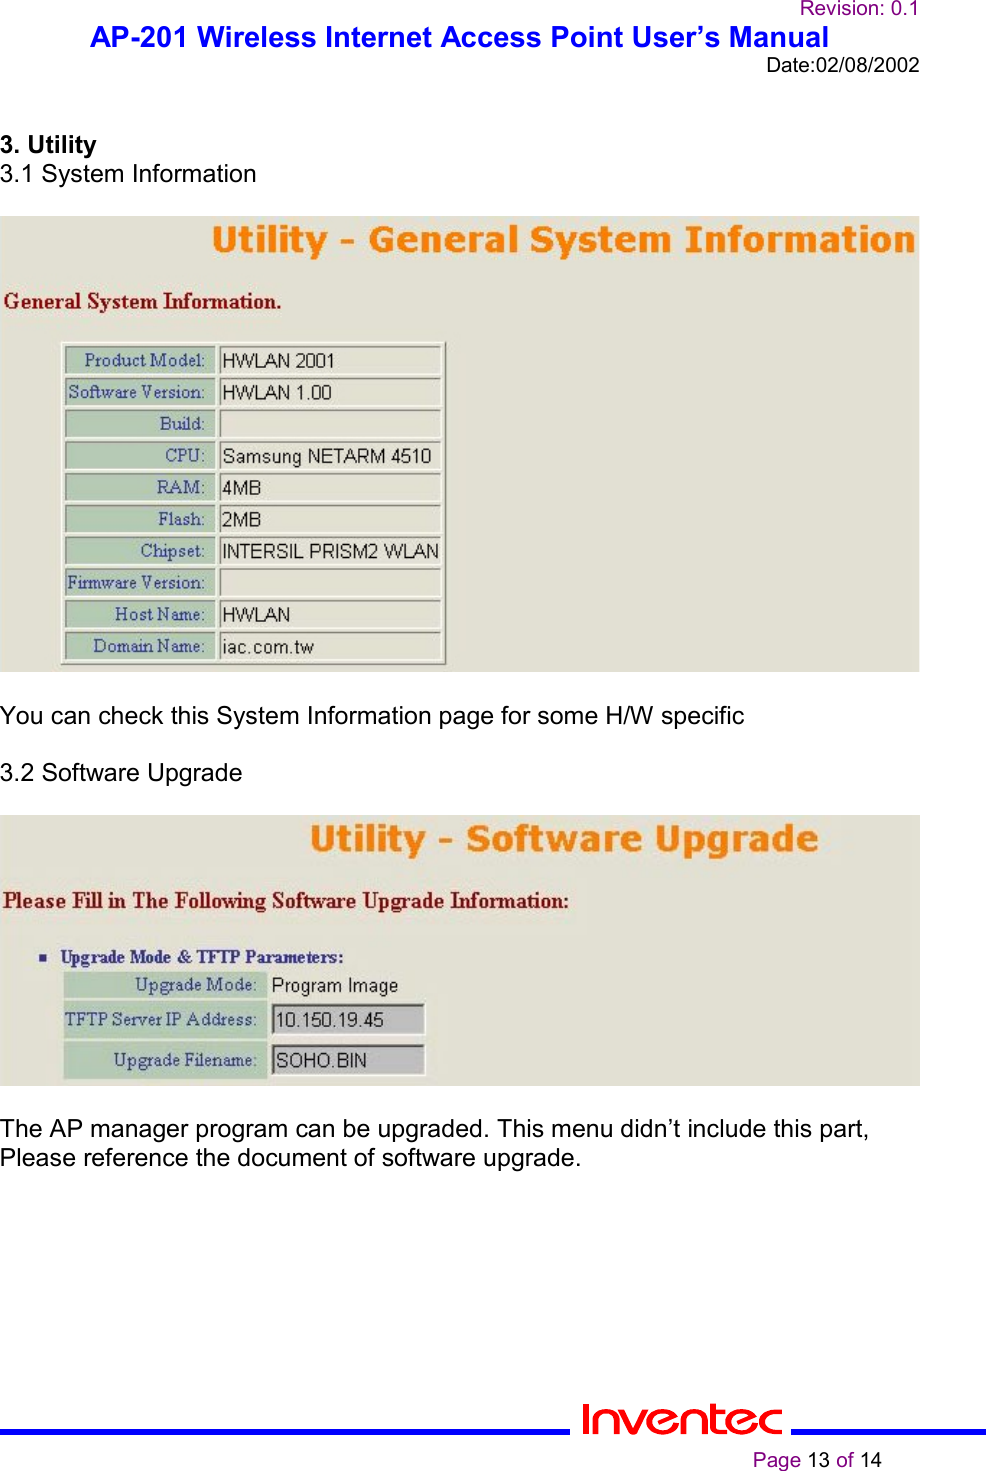 Revision: 0.1AP-201 Wireless Internet Access Point User’s ManualDate:02/08/2002                                                                                                                                                    Page 13 of 143. Utility3.1 System InformationYou can check this System Information page for some H/W specific3.2 Software UpgradeThe AP manager program can be upgraded. This menu didn’t include this part,Please reference the document of software upgrade.